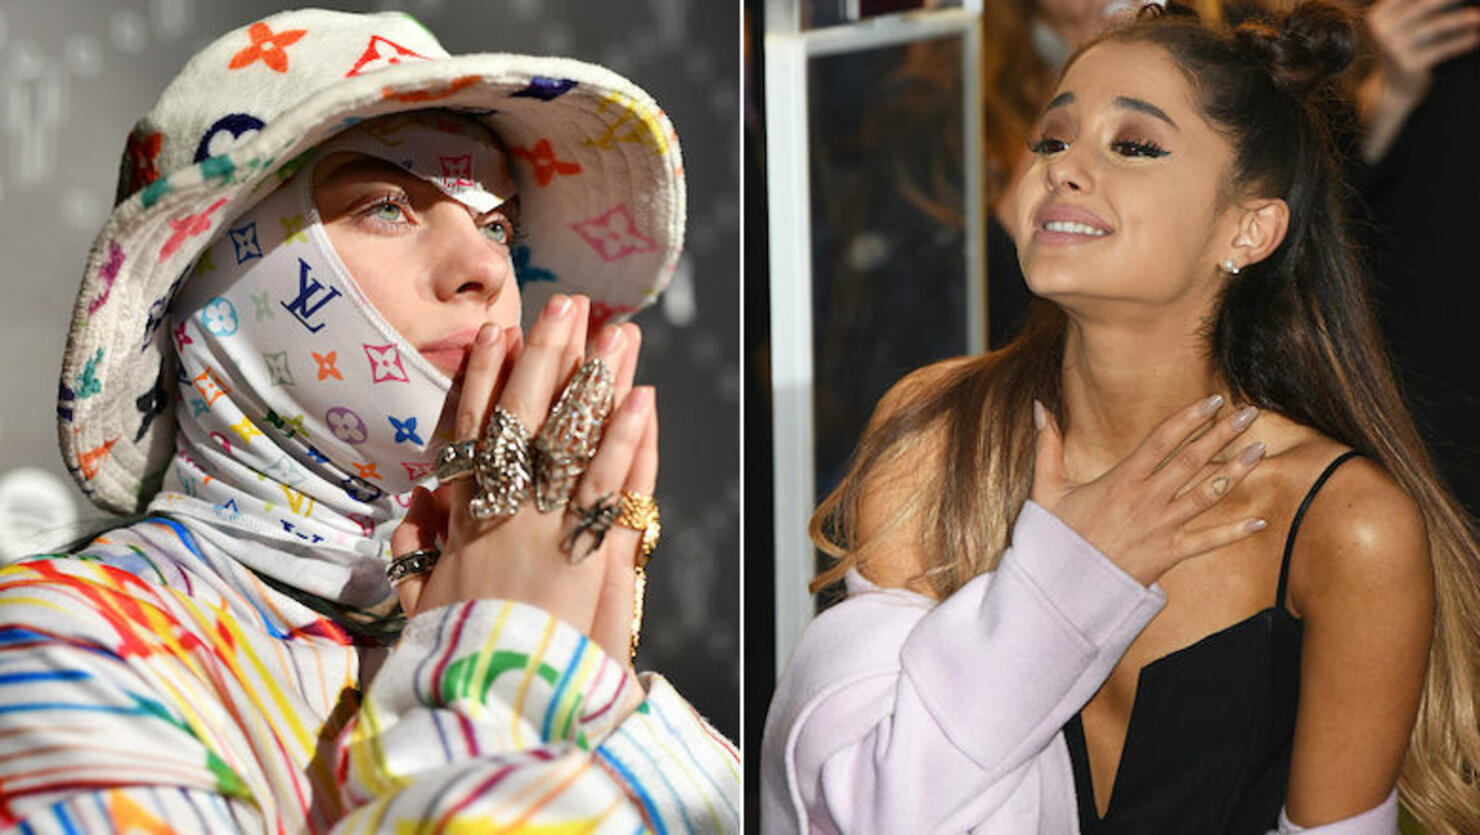 Billie Gushes About Her 'Respect' For Ariana Grande | iHeart